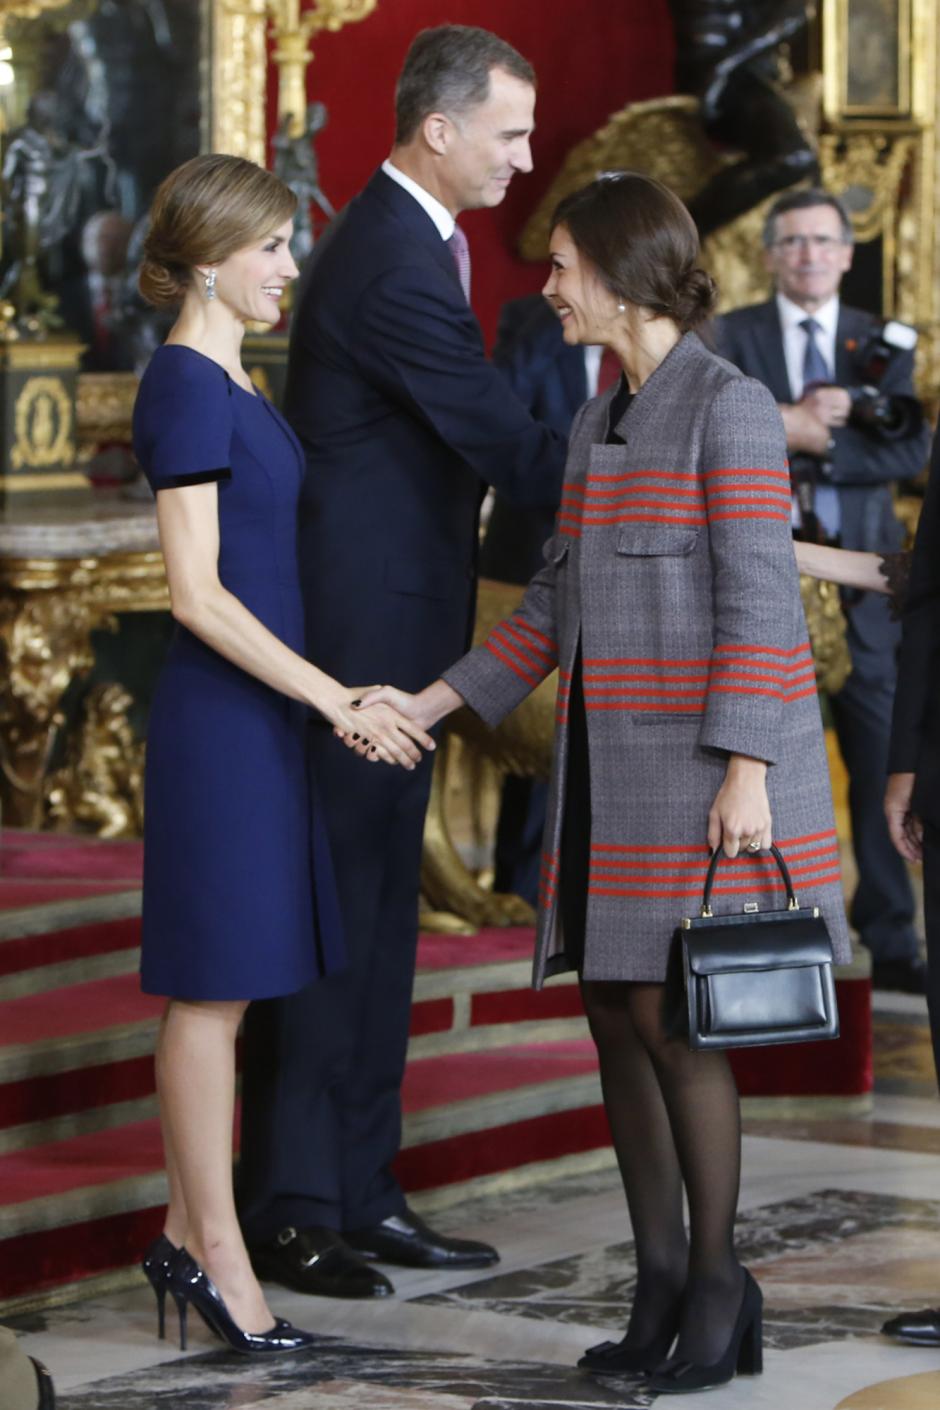 King Felipe VI of Spain and Queen Letizia with stylist Eva Fernandez attending a reception at Royal Palace during the known as Dia de la Hispanidad, Spain's National Day, in Madrid, on Monday 12 October, 2015